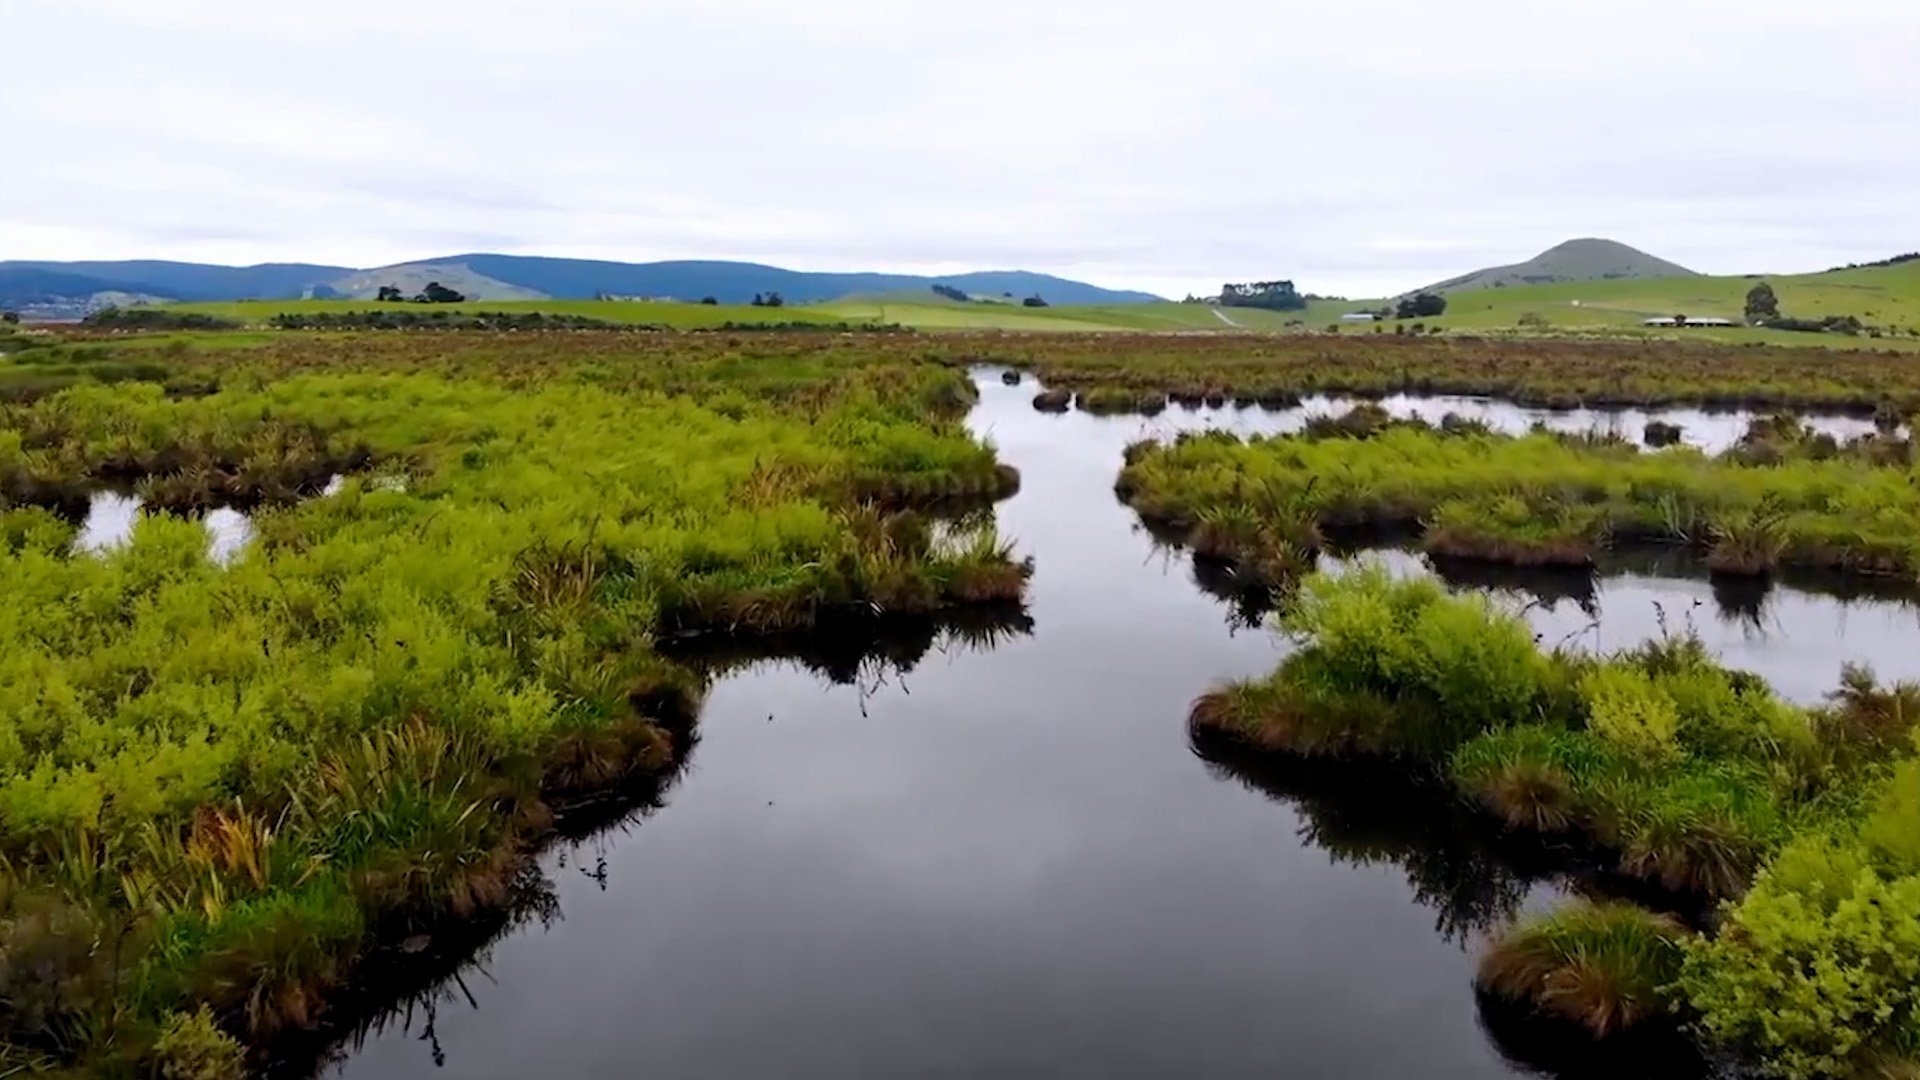 For many generations, the plentiful fish and birds of the Taiari wetlands, lakes and streams...